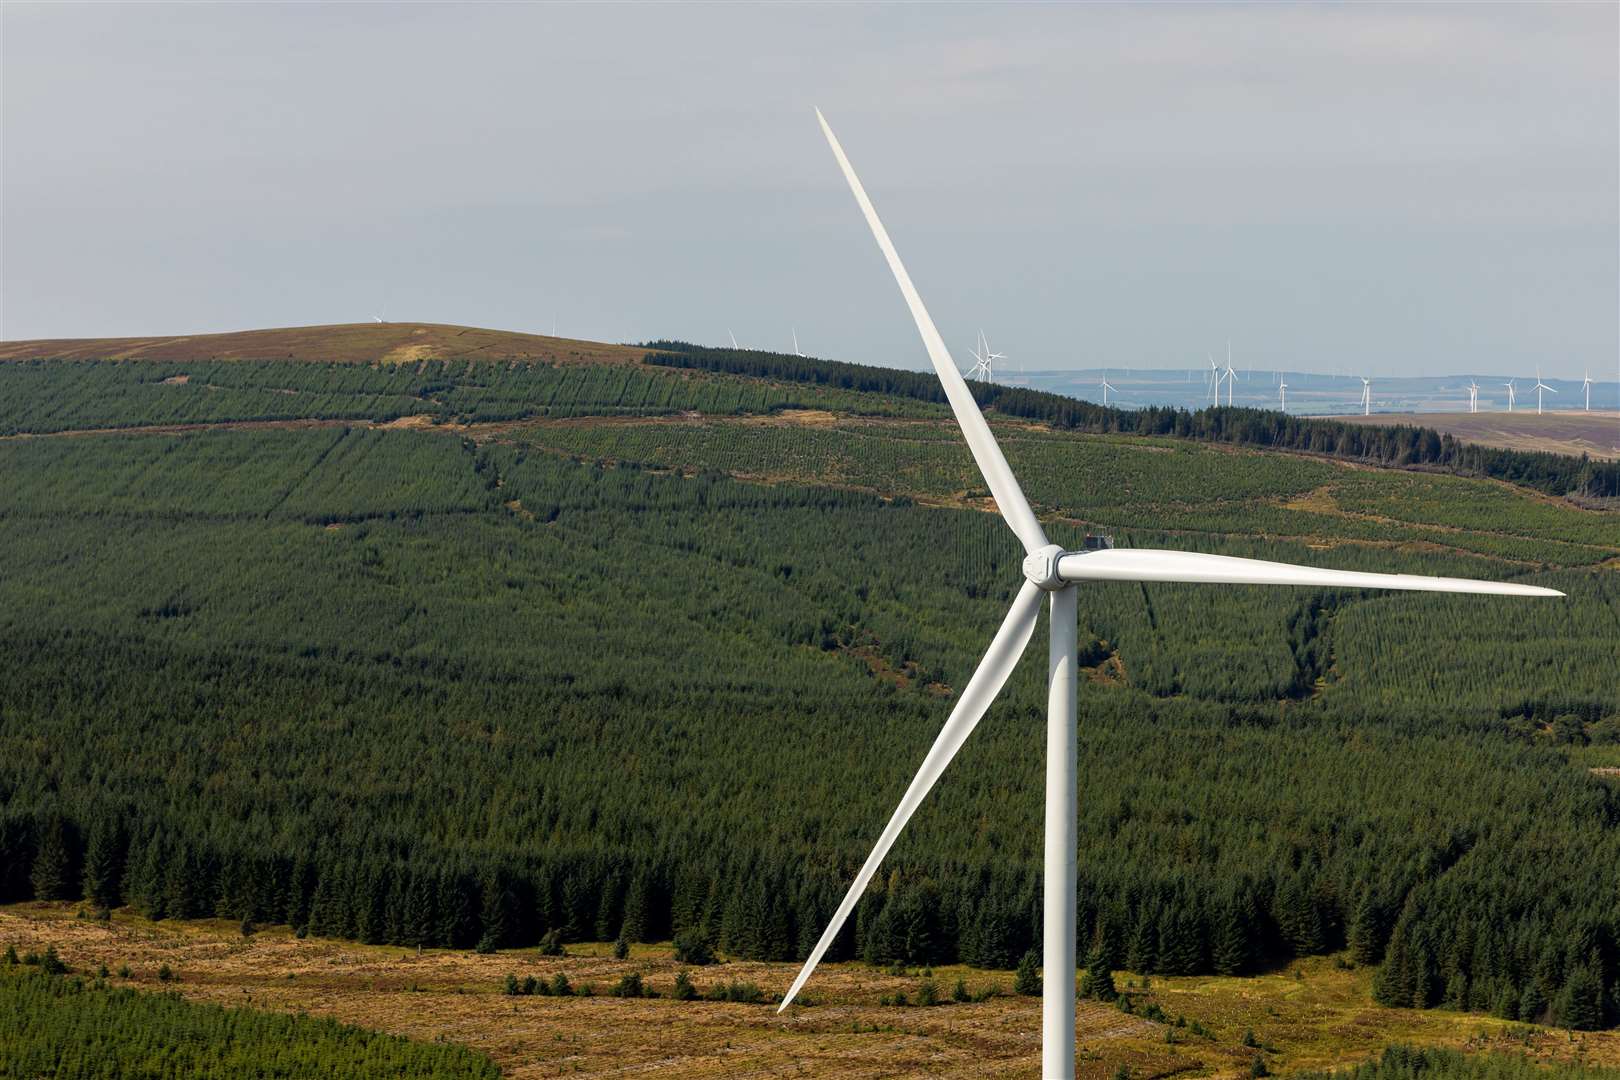 Hill of Fare Windfarm Information Group has warned that without a Public Inquiry, the proposed controversial Hill of Fare Windfarm is inevitable.